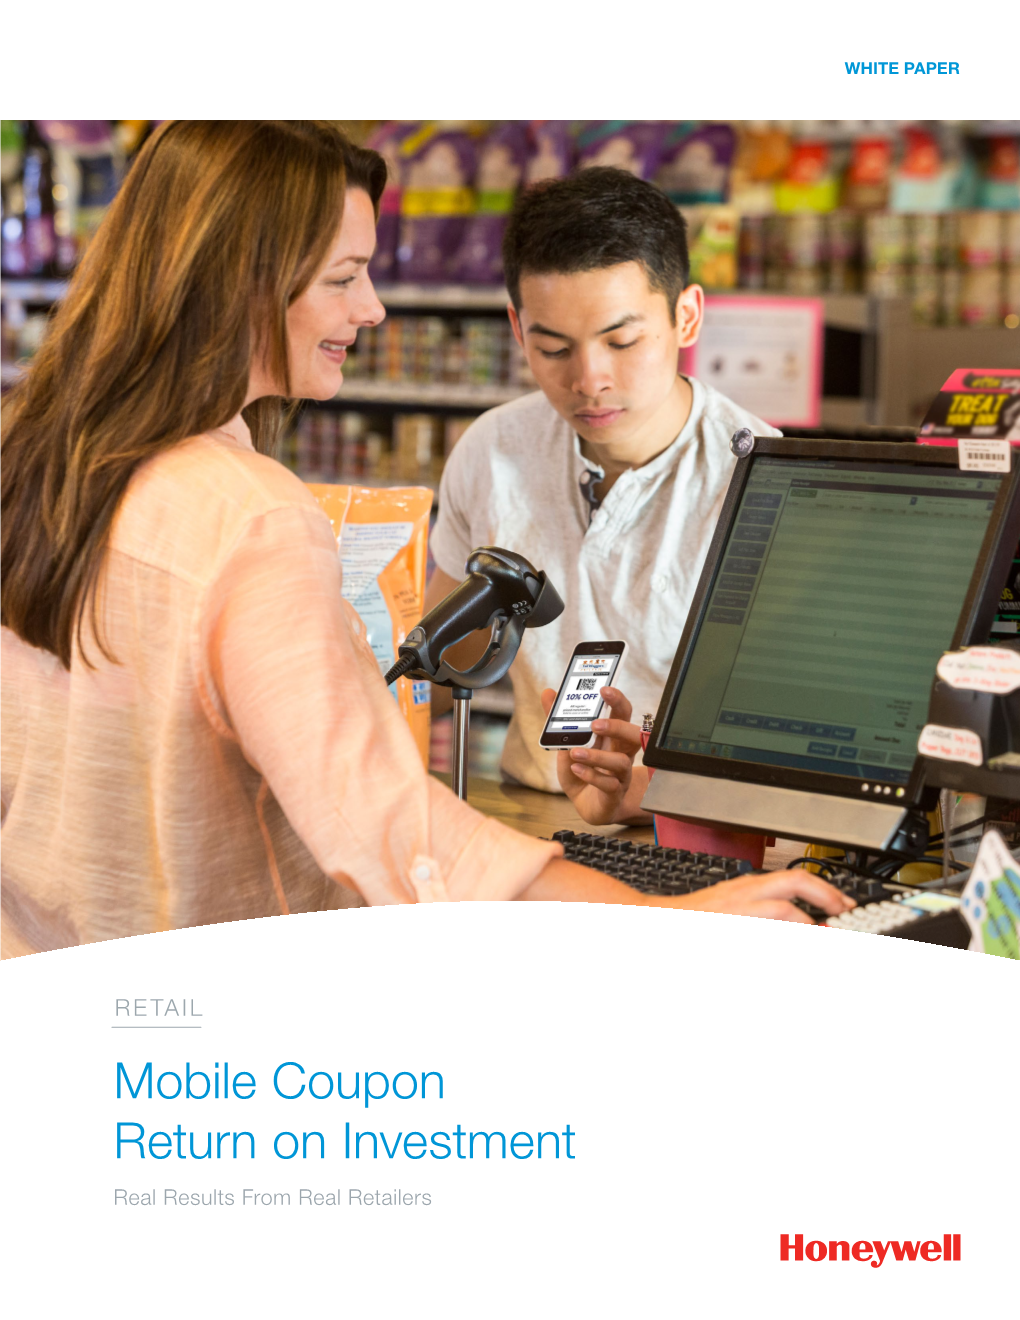 Mobile Coupon Return on Investment White Paper